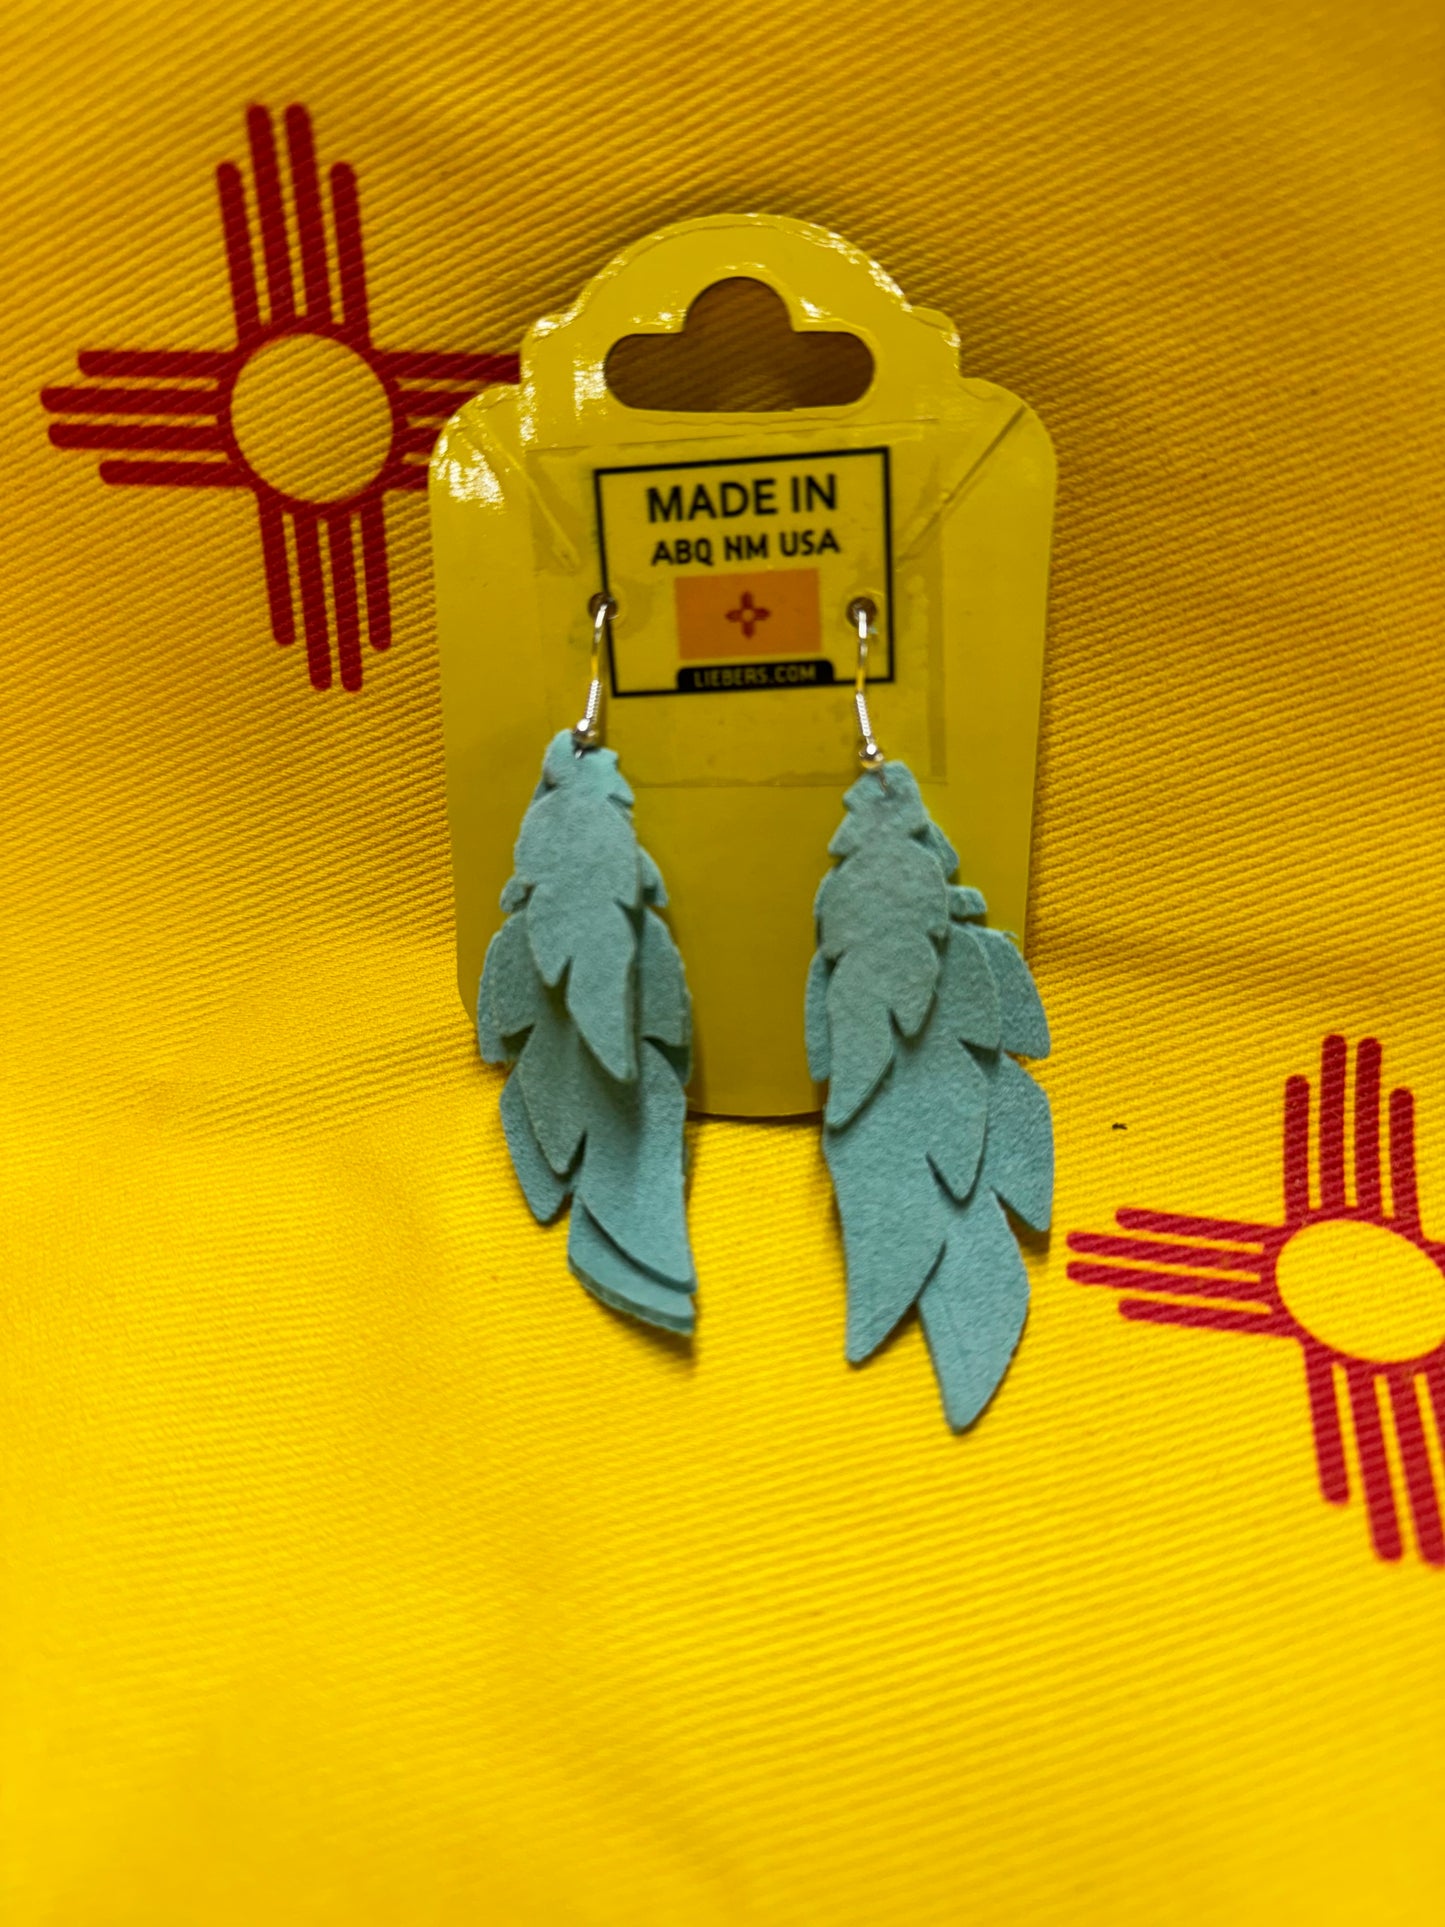 Luggage Lab- Handcrafted in ABQ NM- Silver/Leather Earrings